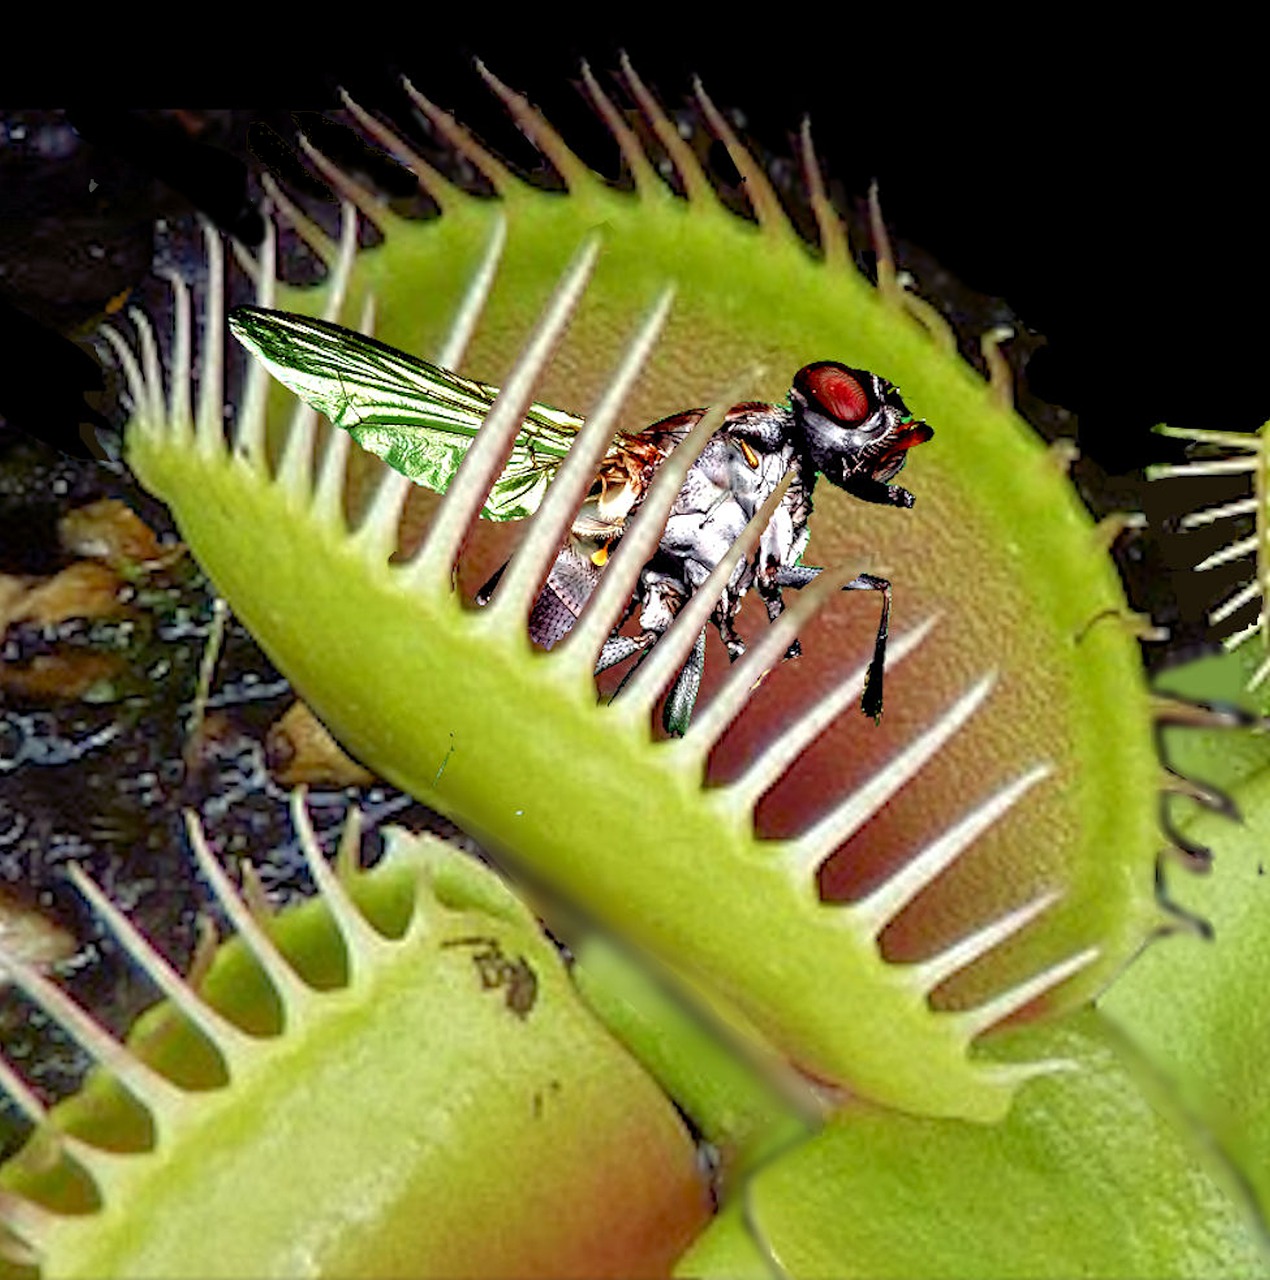 venus-flytrap-facts-for-kids-fun-facts-about-the-venus-fly-trap-we